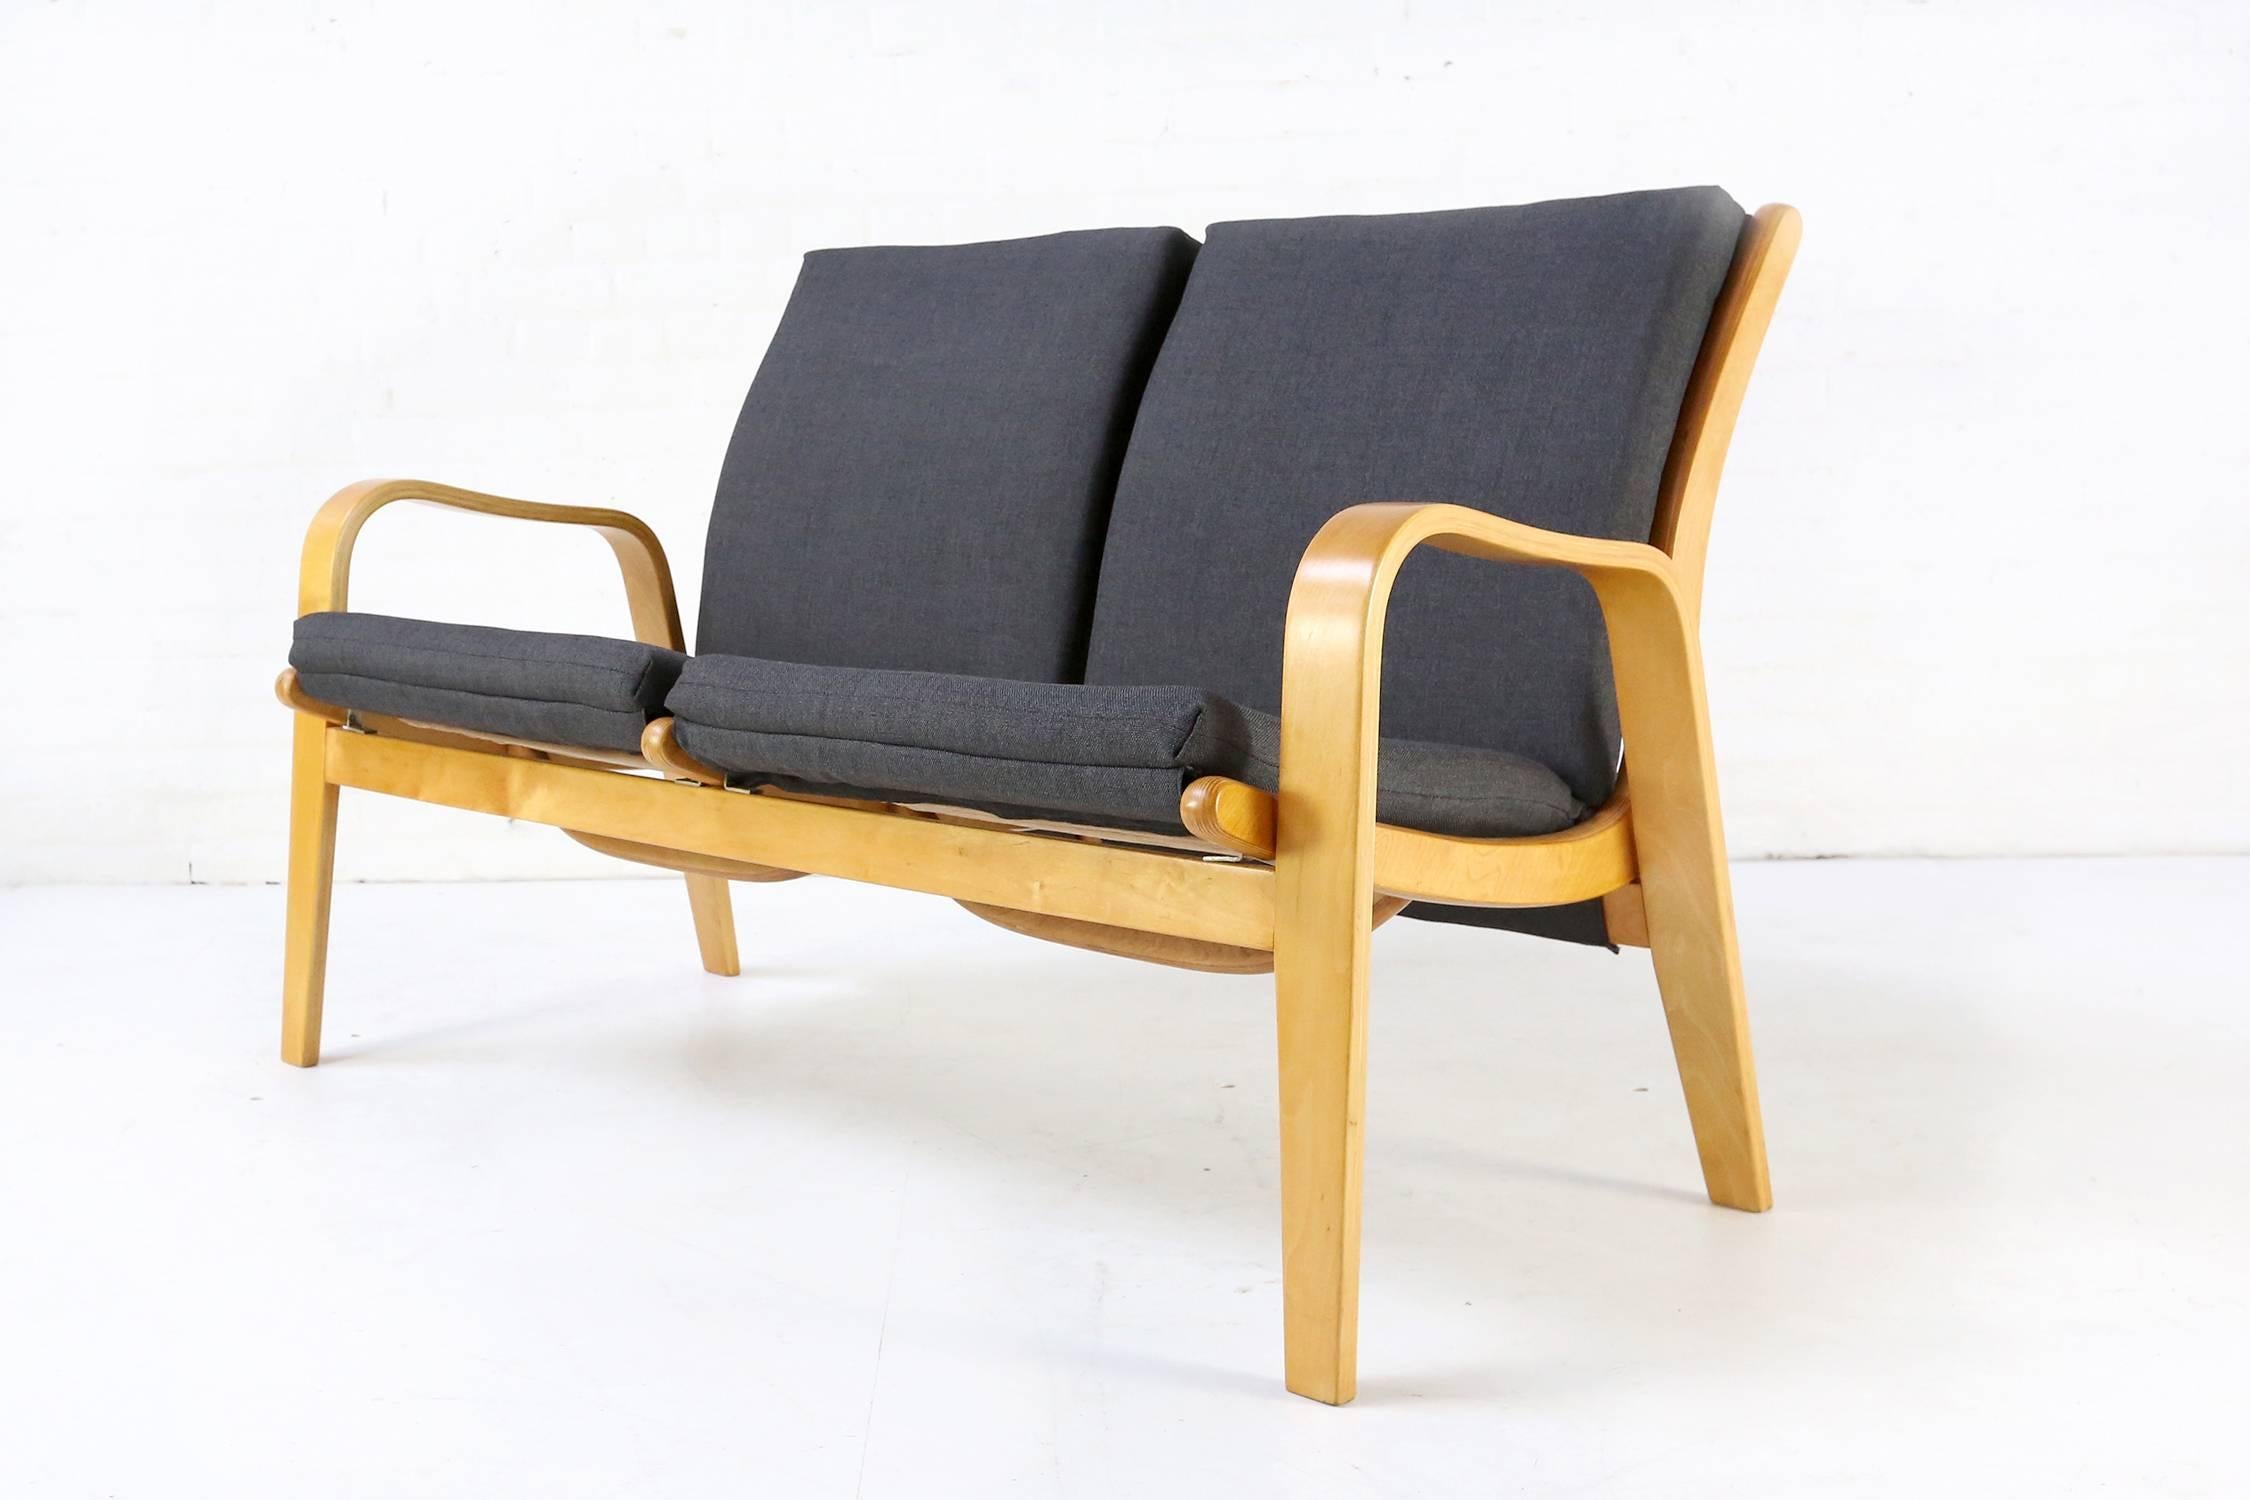 Very nice sofa set designed by Cees Braakman during the 1950s for Pastoe
Definitely influenced by Alvar Aalto, this bent birch framed loveseat and two easy chairs have new upholstered cushions and foam. Plywood is recently refinished and has a